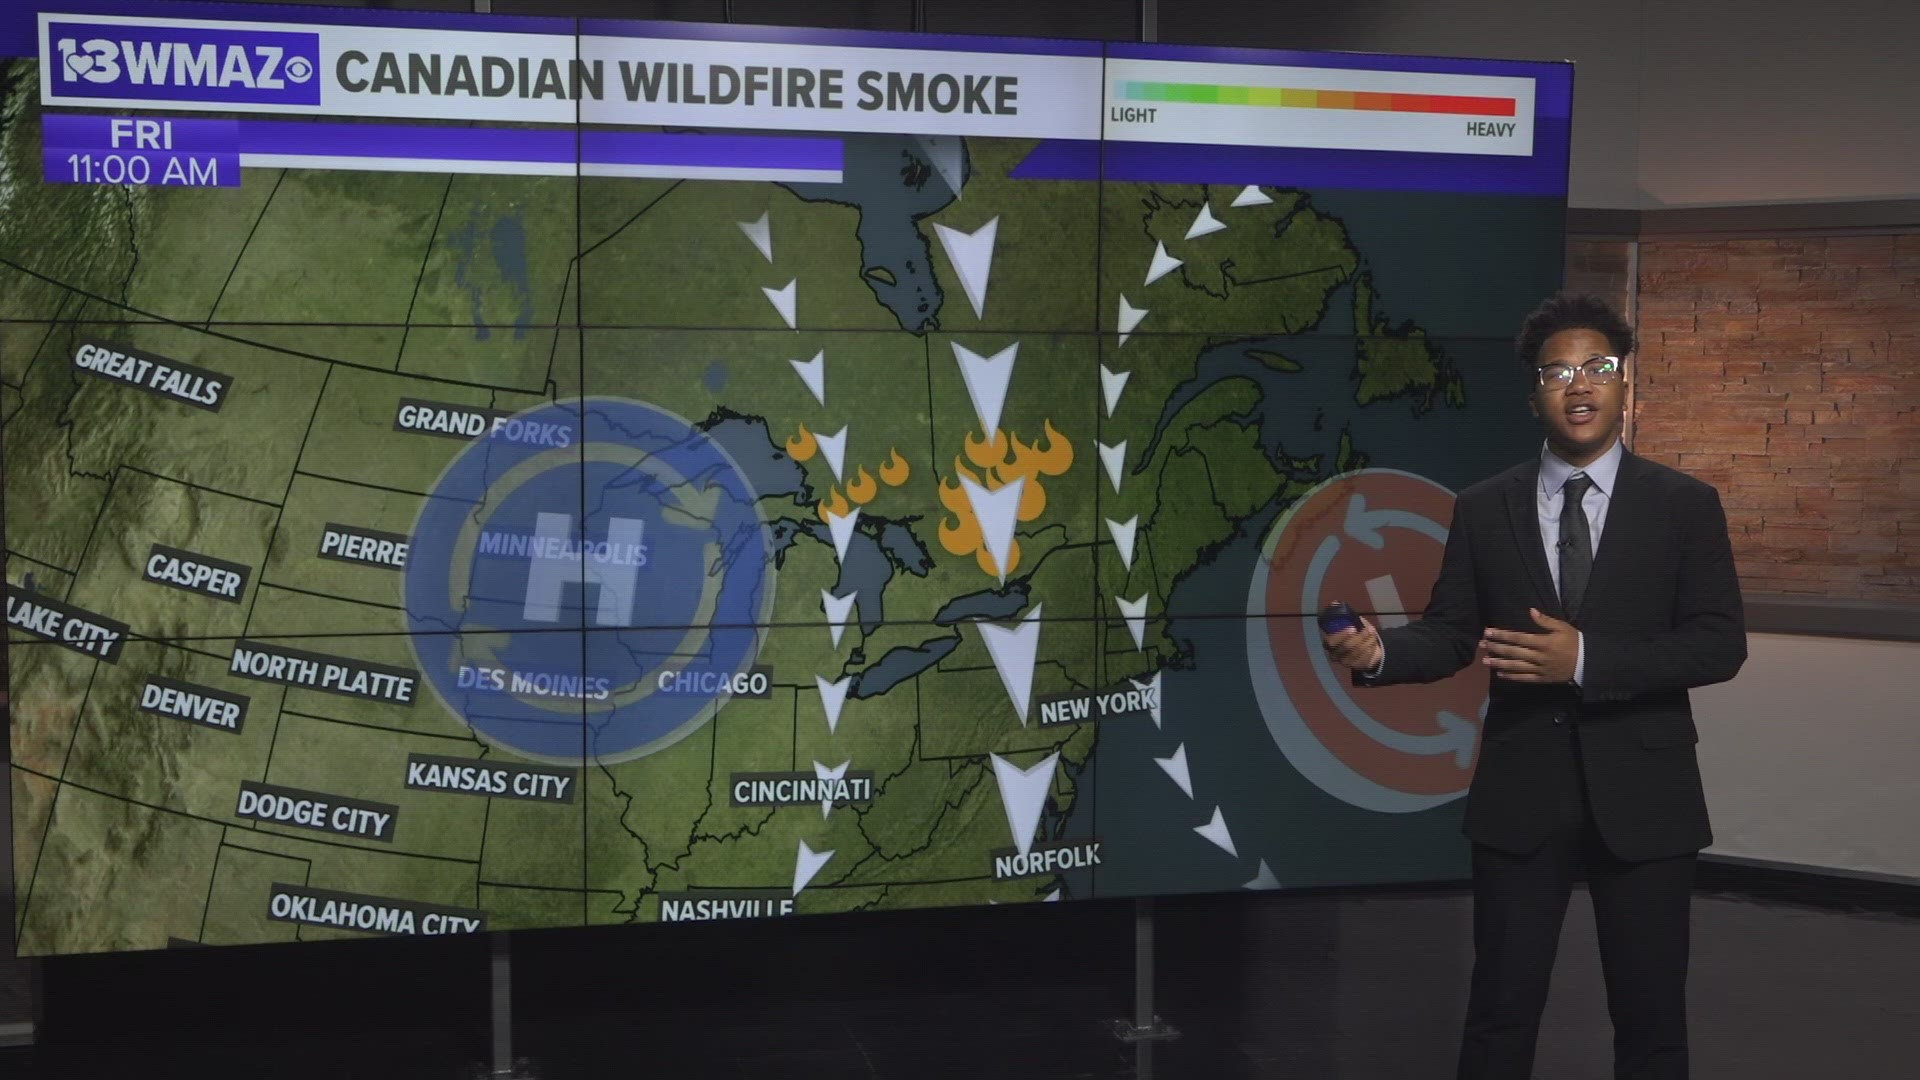 Smoke from Canadian wildfires is drifting down the eastern coast. Here's how you can keep track of your air quality!